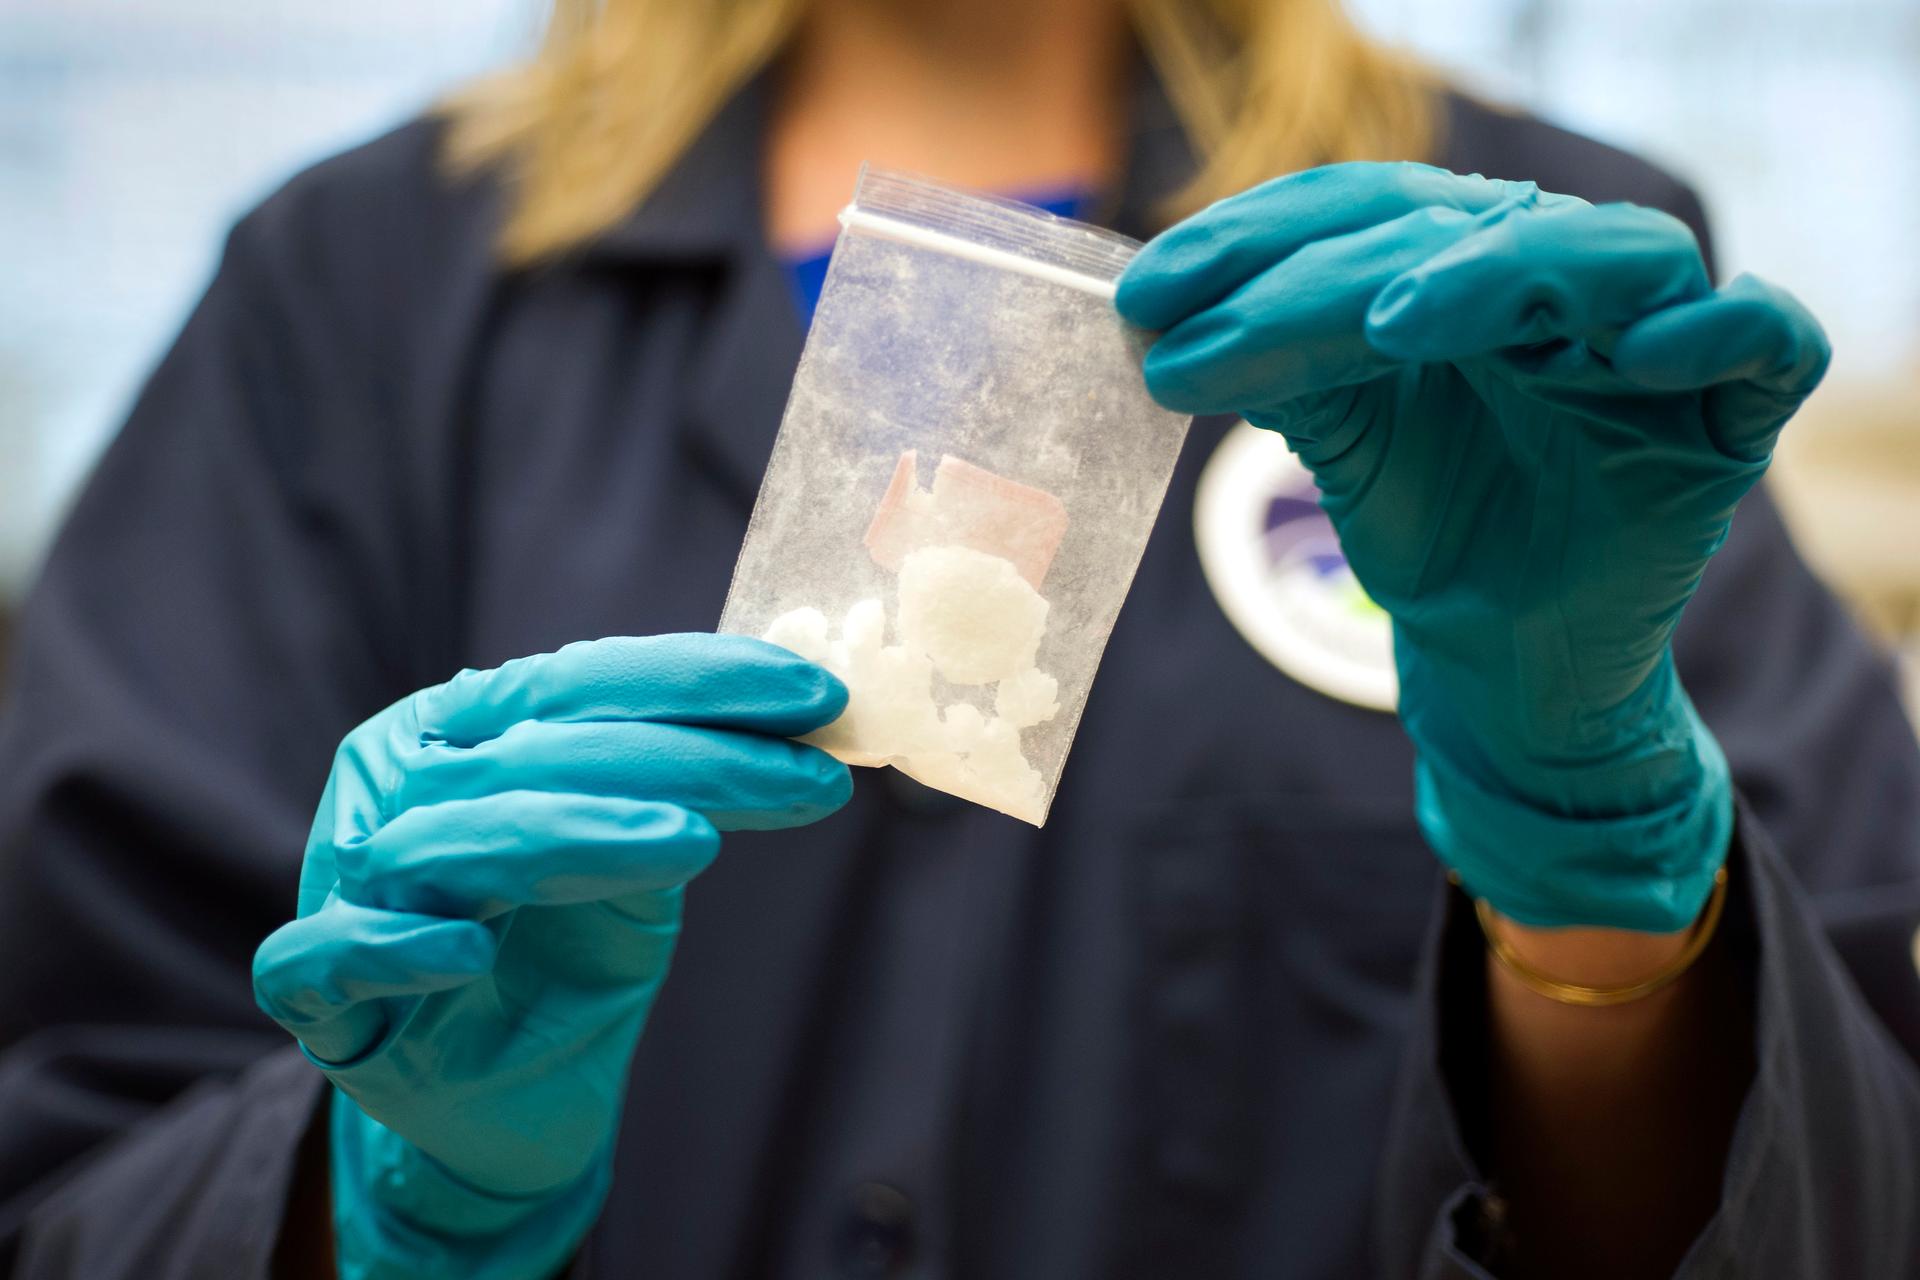 A bag of 4-fluoro isobutyryl fentanyl which was seized in a drug raid is displayed at the Drug Enforcement Administration (DEA) Special Testing and Research Laboratory in Sterling, Va. The DEA is setting up an office in China to work with Beijing to try t